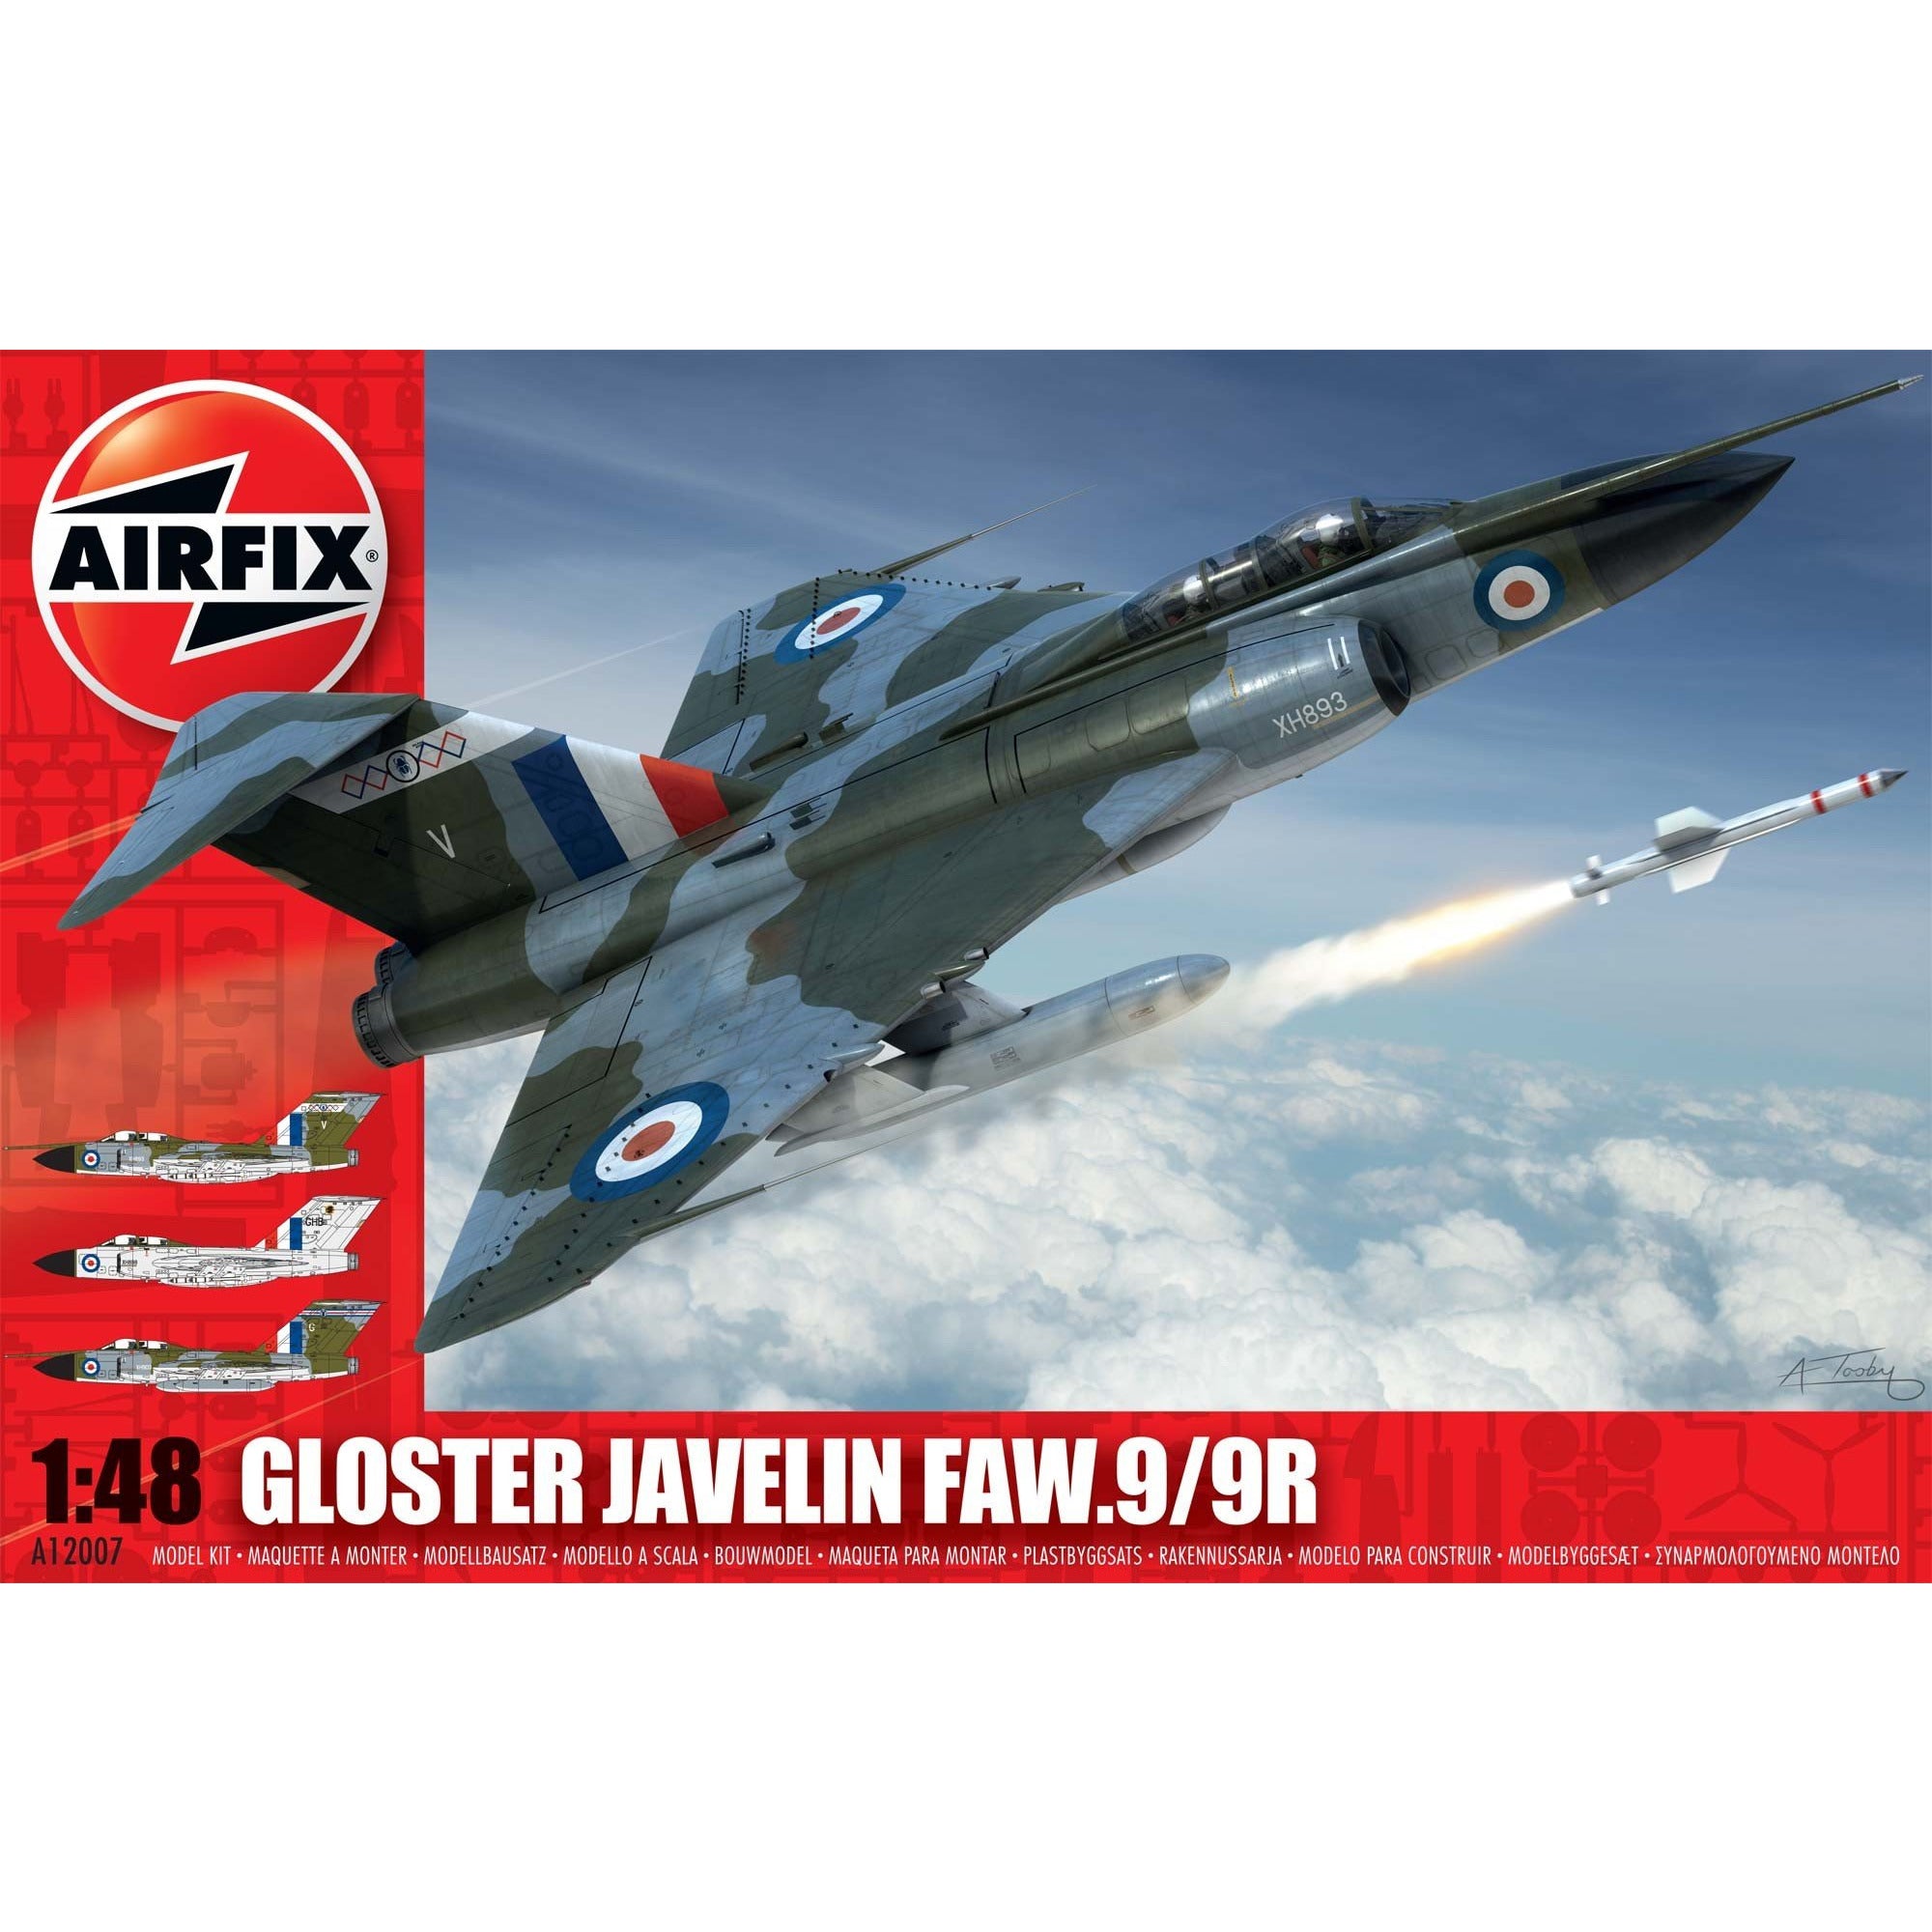 Gloster Javelin FAW.9/9R 1/48 #A12007 by Airfix